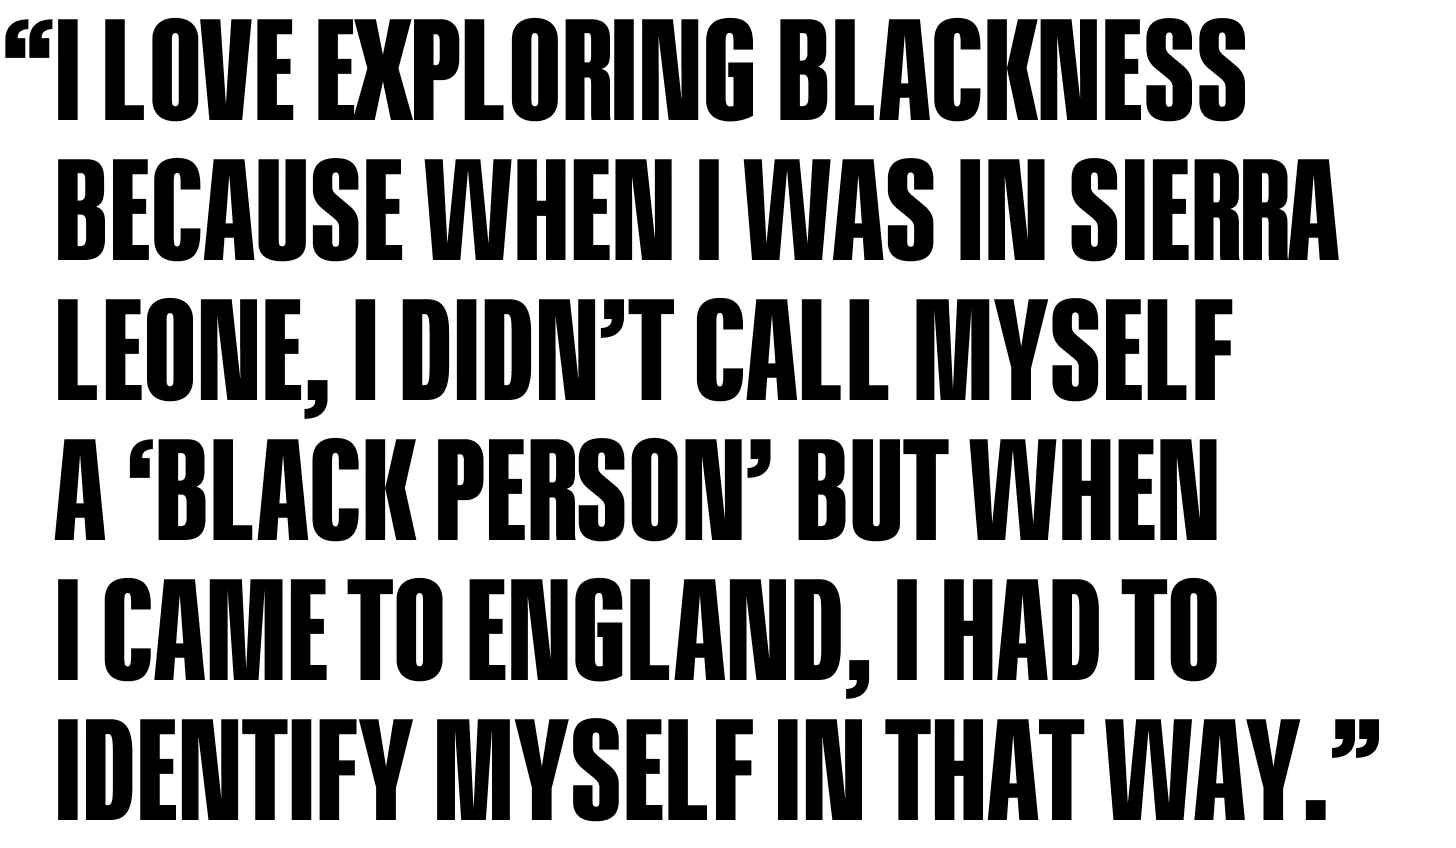 I love exploring Blackness because when I was in Sierra Leone, I didn’t call myself a ‘Black person’ but when I came to England, I had to identify myself in that way.